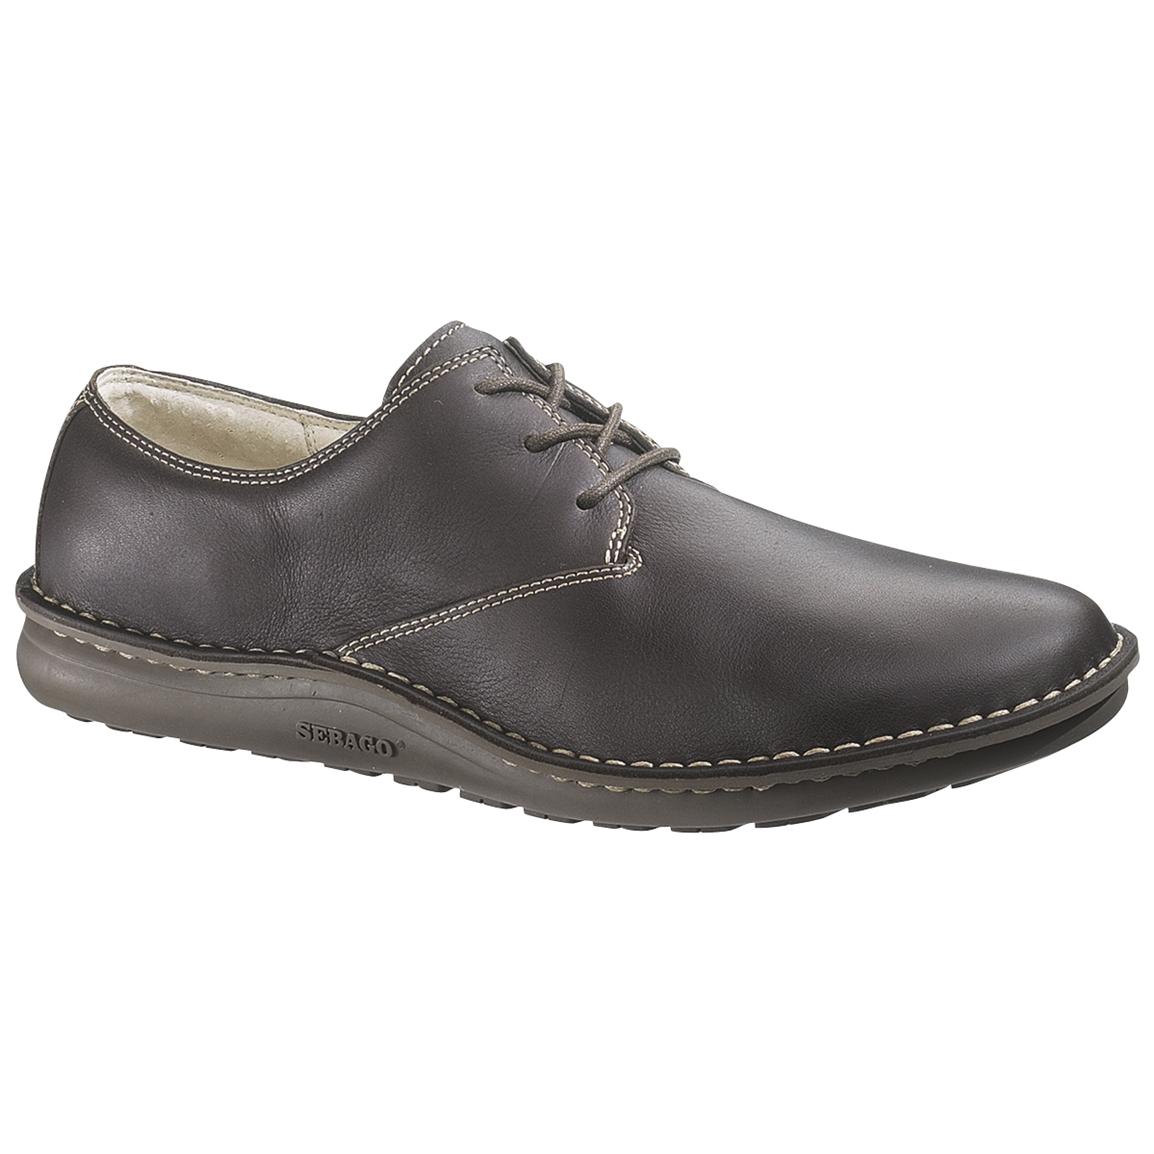 Sebago™ Valencia Shoes - 188113, Casual Shoes at Sportsman's Guide